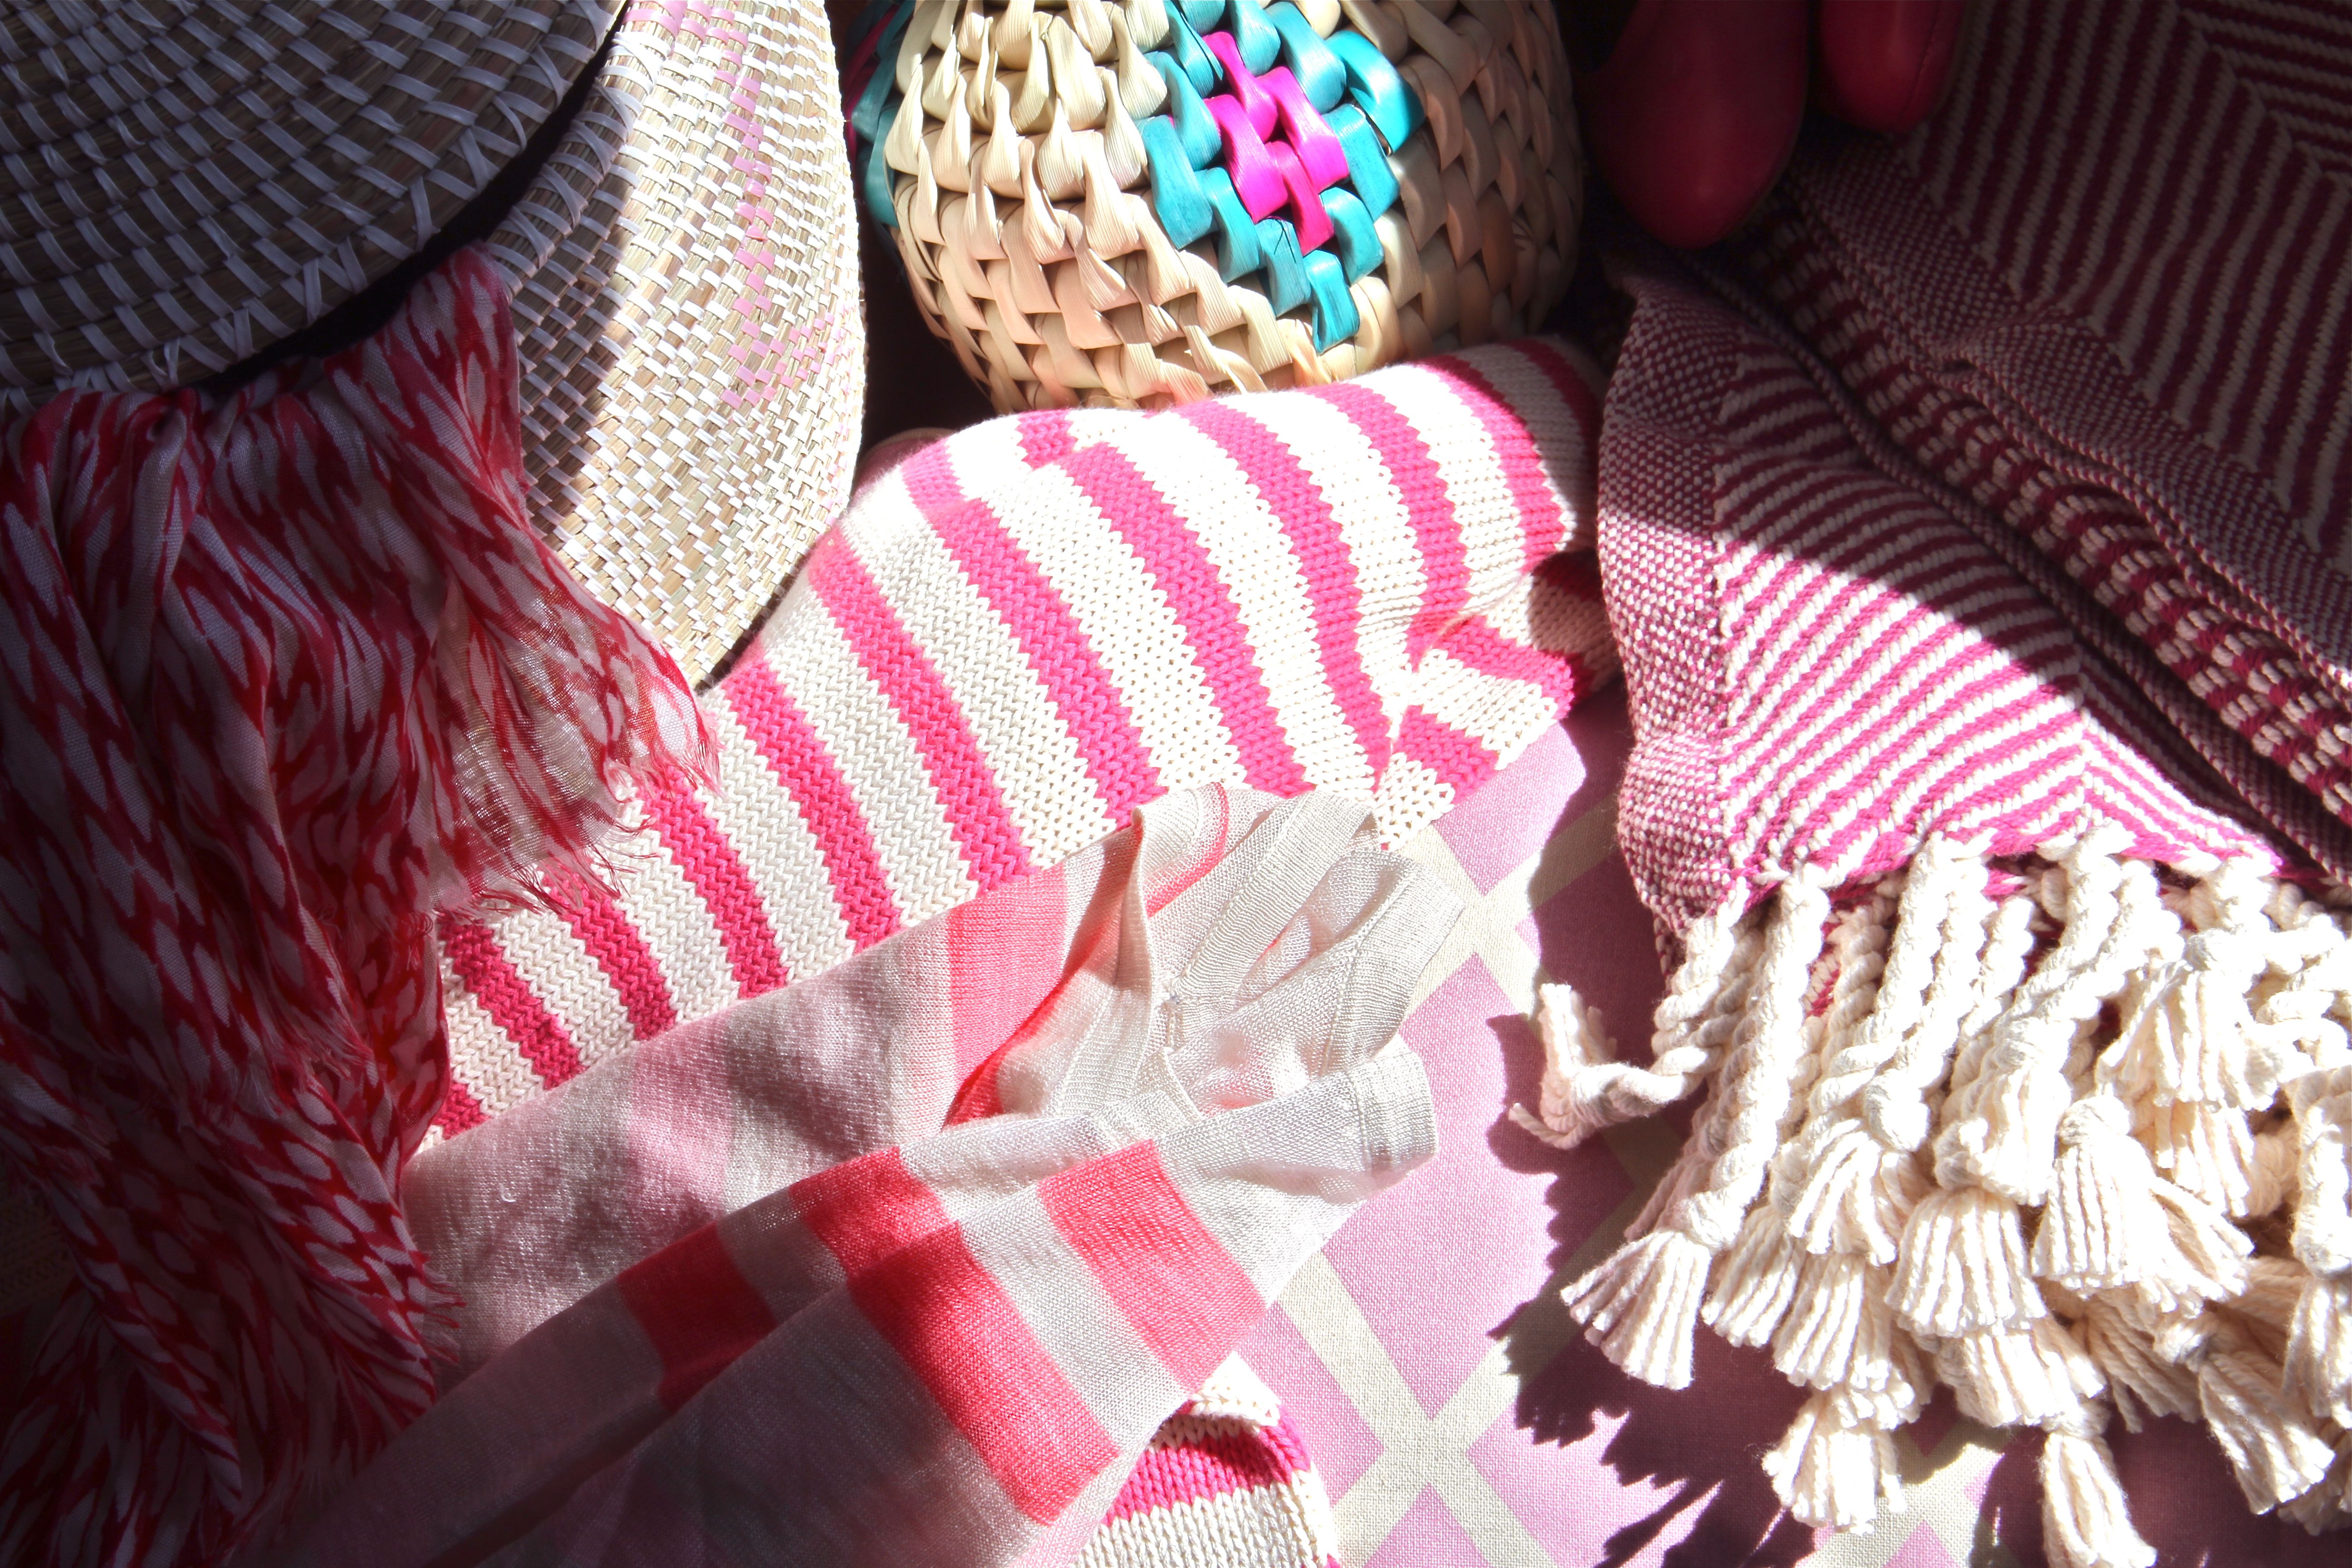 Each and every item in this heap makes me happy, so suck on that, pink-haters. Plus, I'm starting to notice a pattern: I like stripes, chevrons and diamonds, pretty much anything geometric and angular.